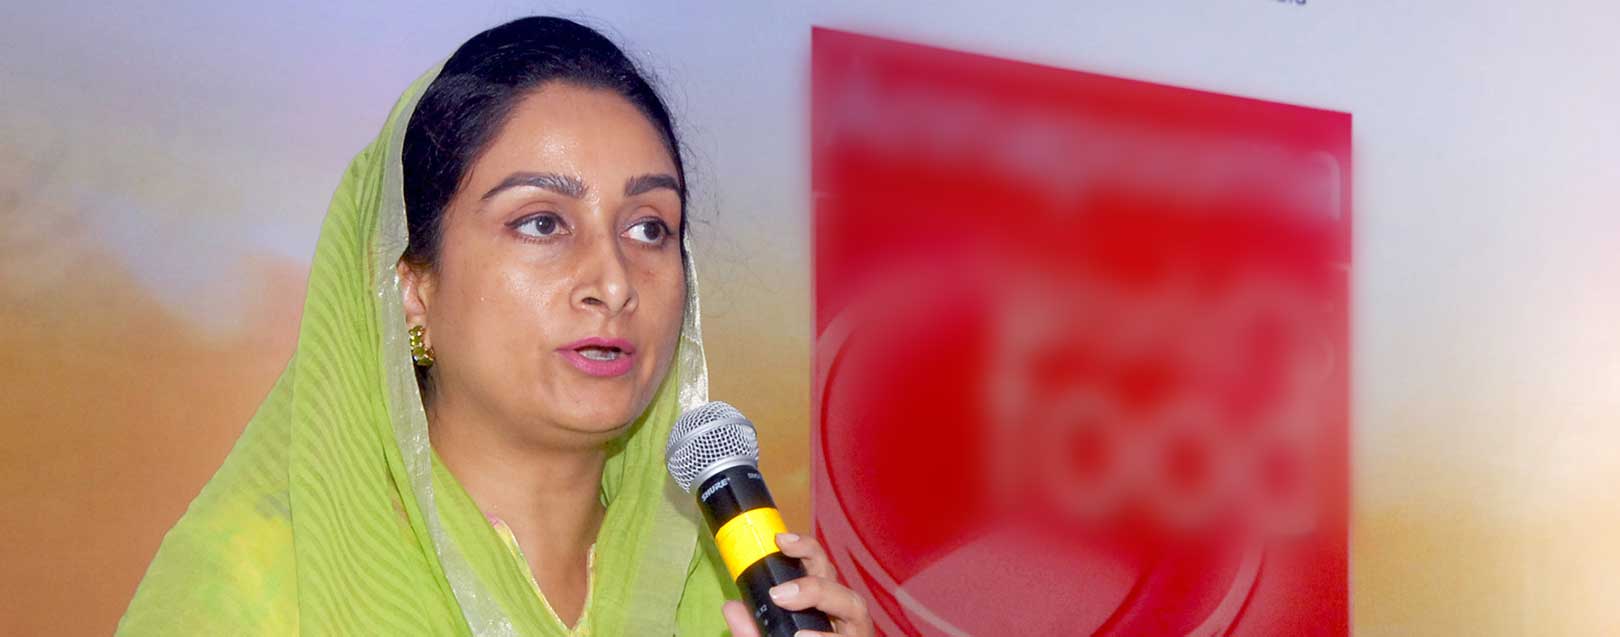 Exports of beef haven't come down: Harsimrat